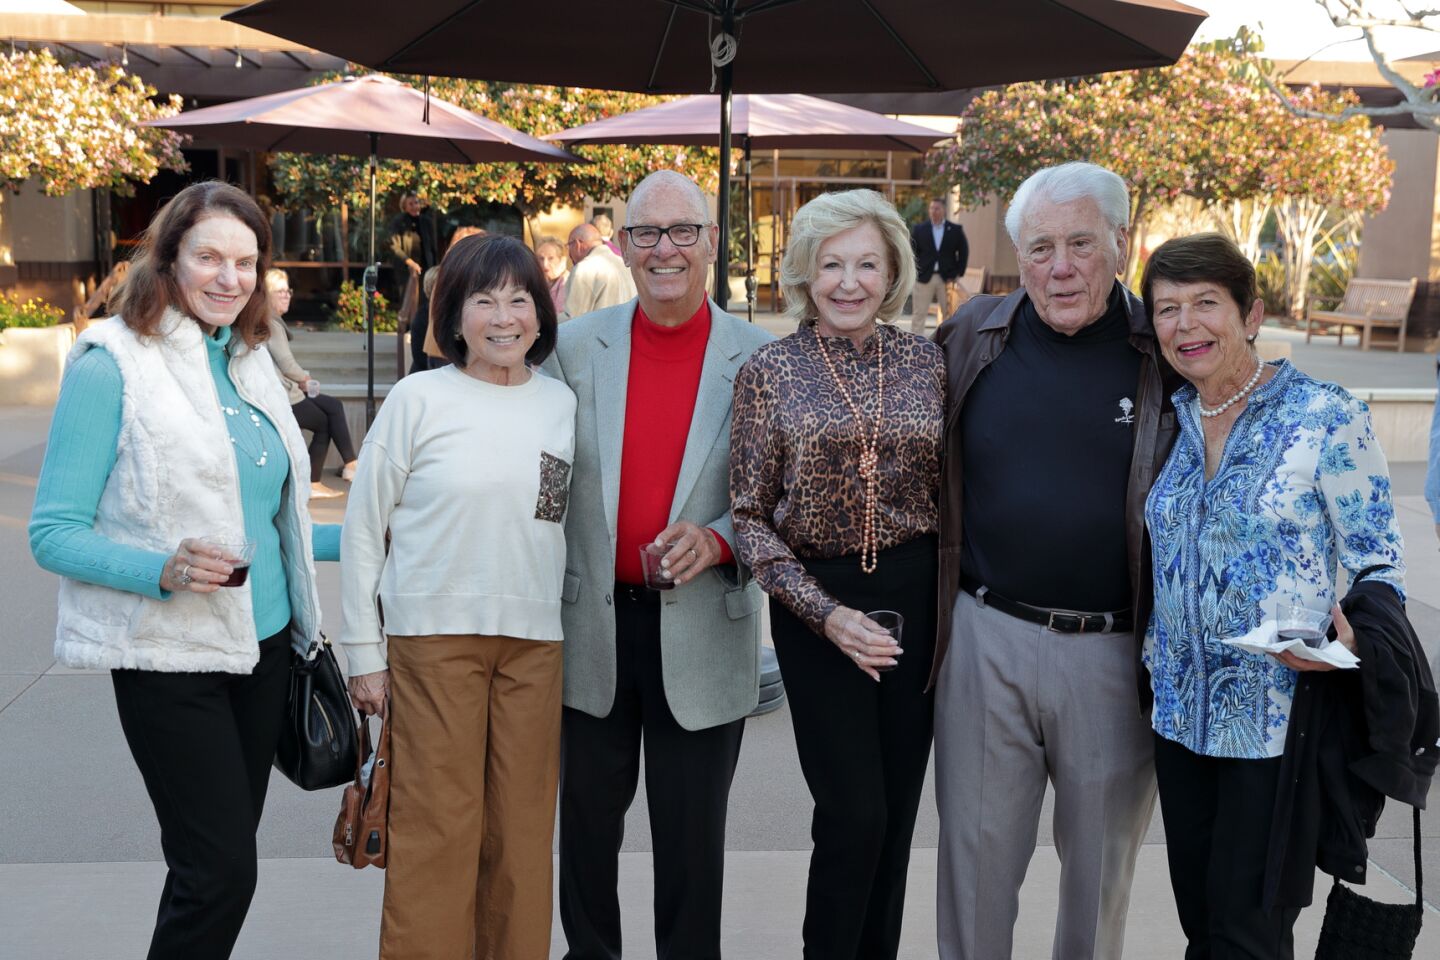 Kathy McElhinney, Edean Chin, Dick Arendsee, Jenny Freeborn, Vearl Smith, Judy Arendsee